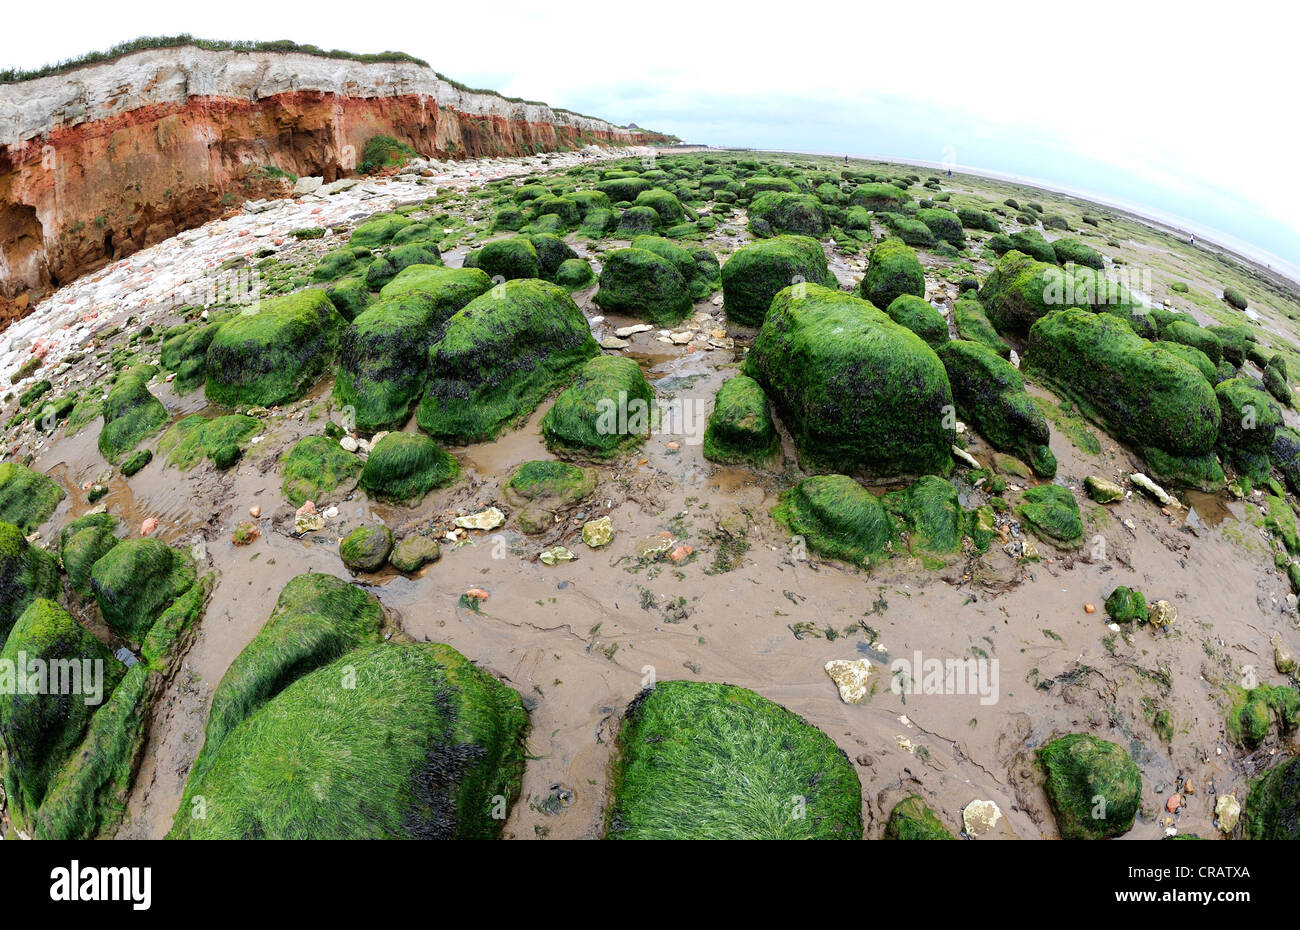 Sea weed covered boulders at low tide with the stratified, fossiliferous cliffs at Hunstanton in North Norfolk, England. Stock Photo